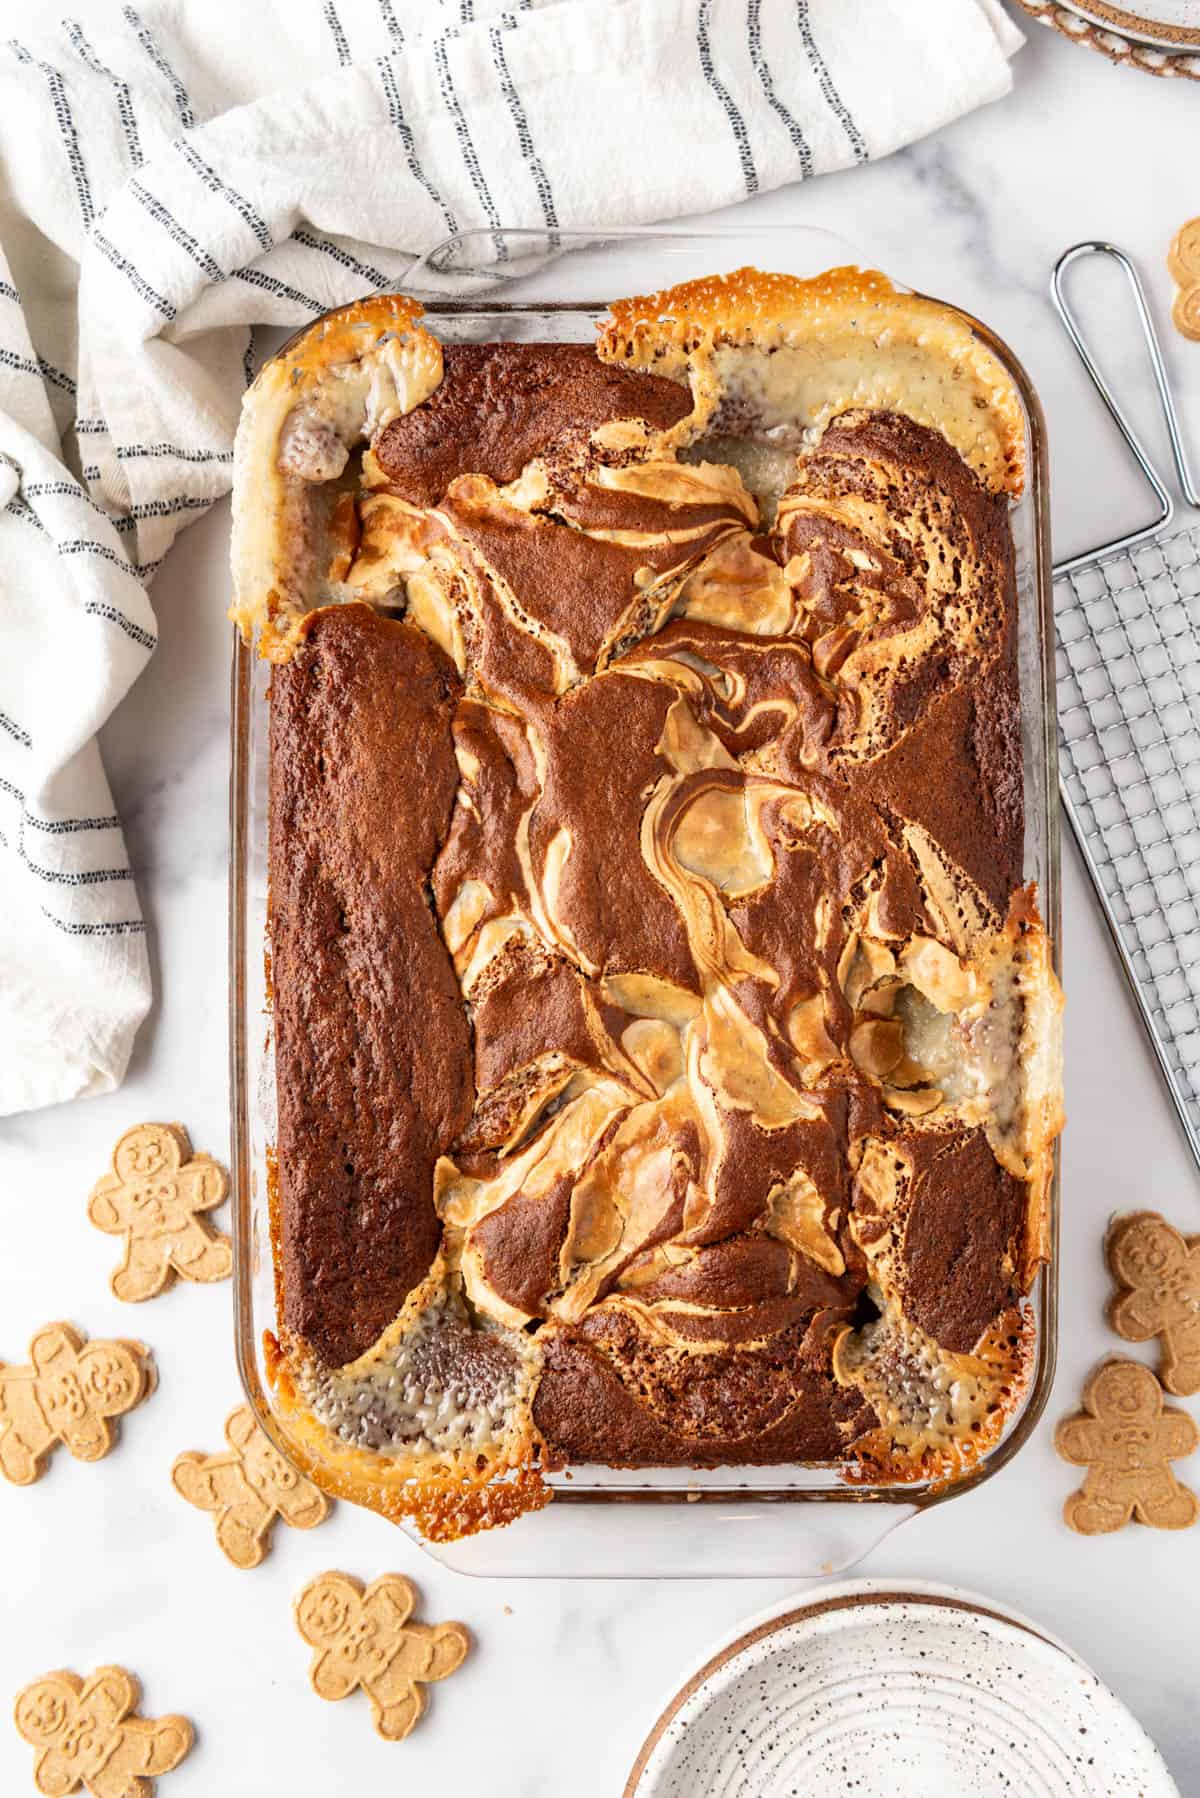 Baked gingerbread earthquake cake in a glass baking dish.